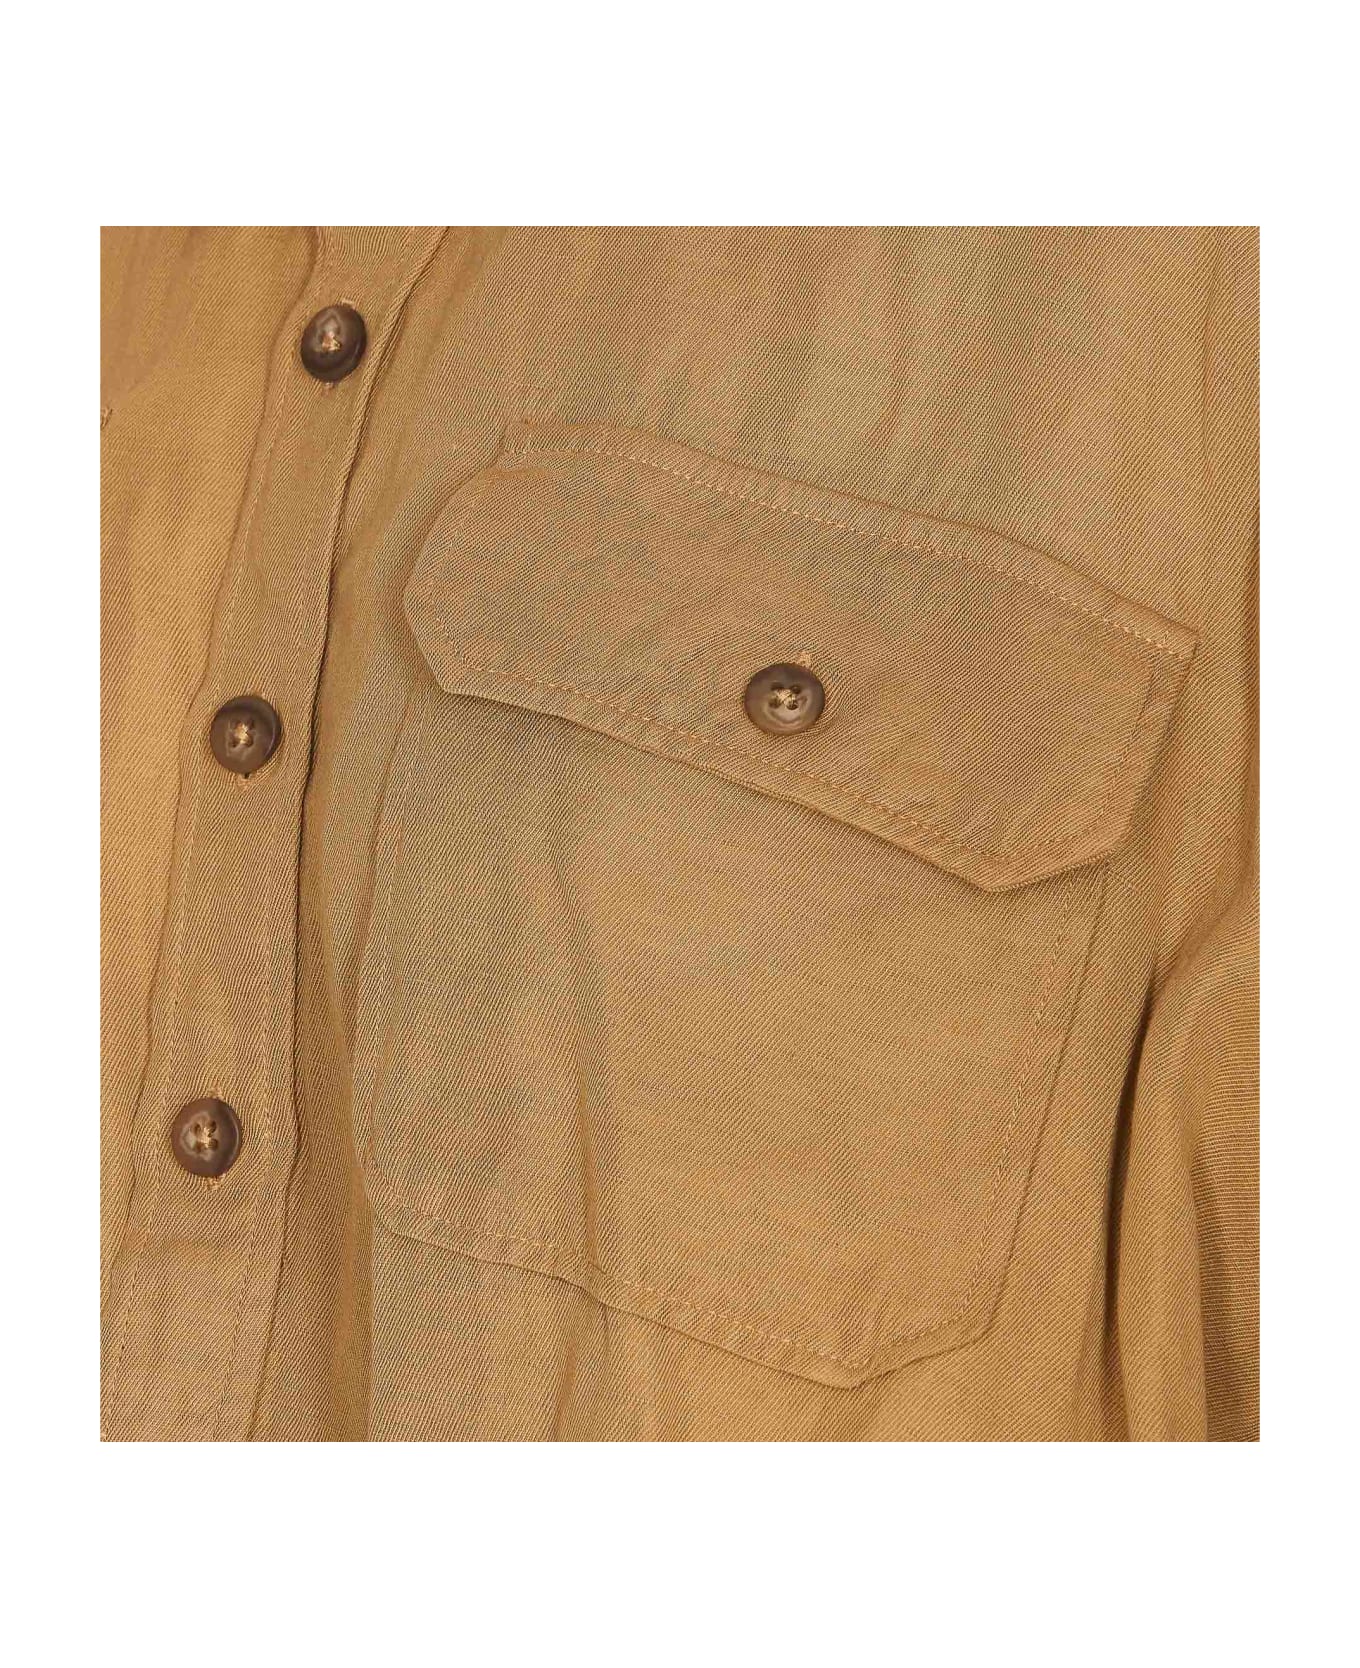 R13 Crossover Utility Bubble Shirt - Beige